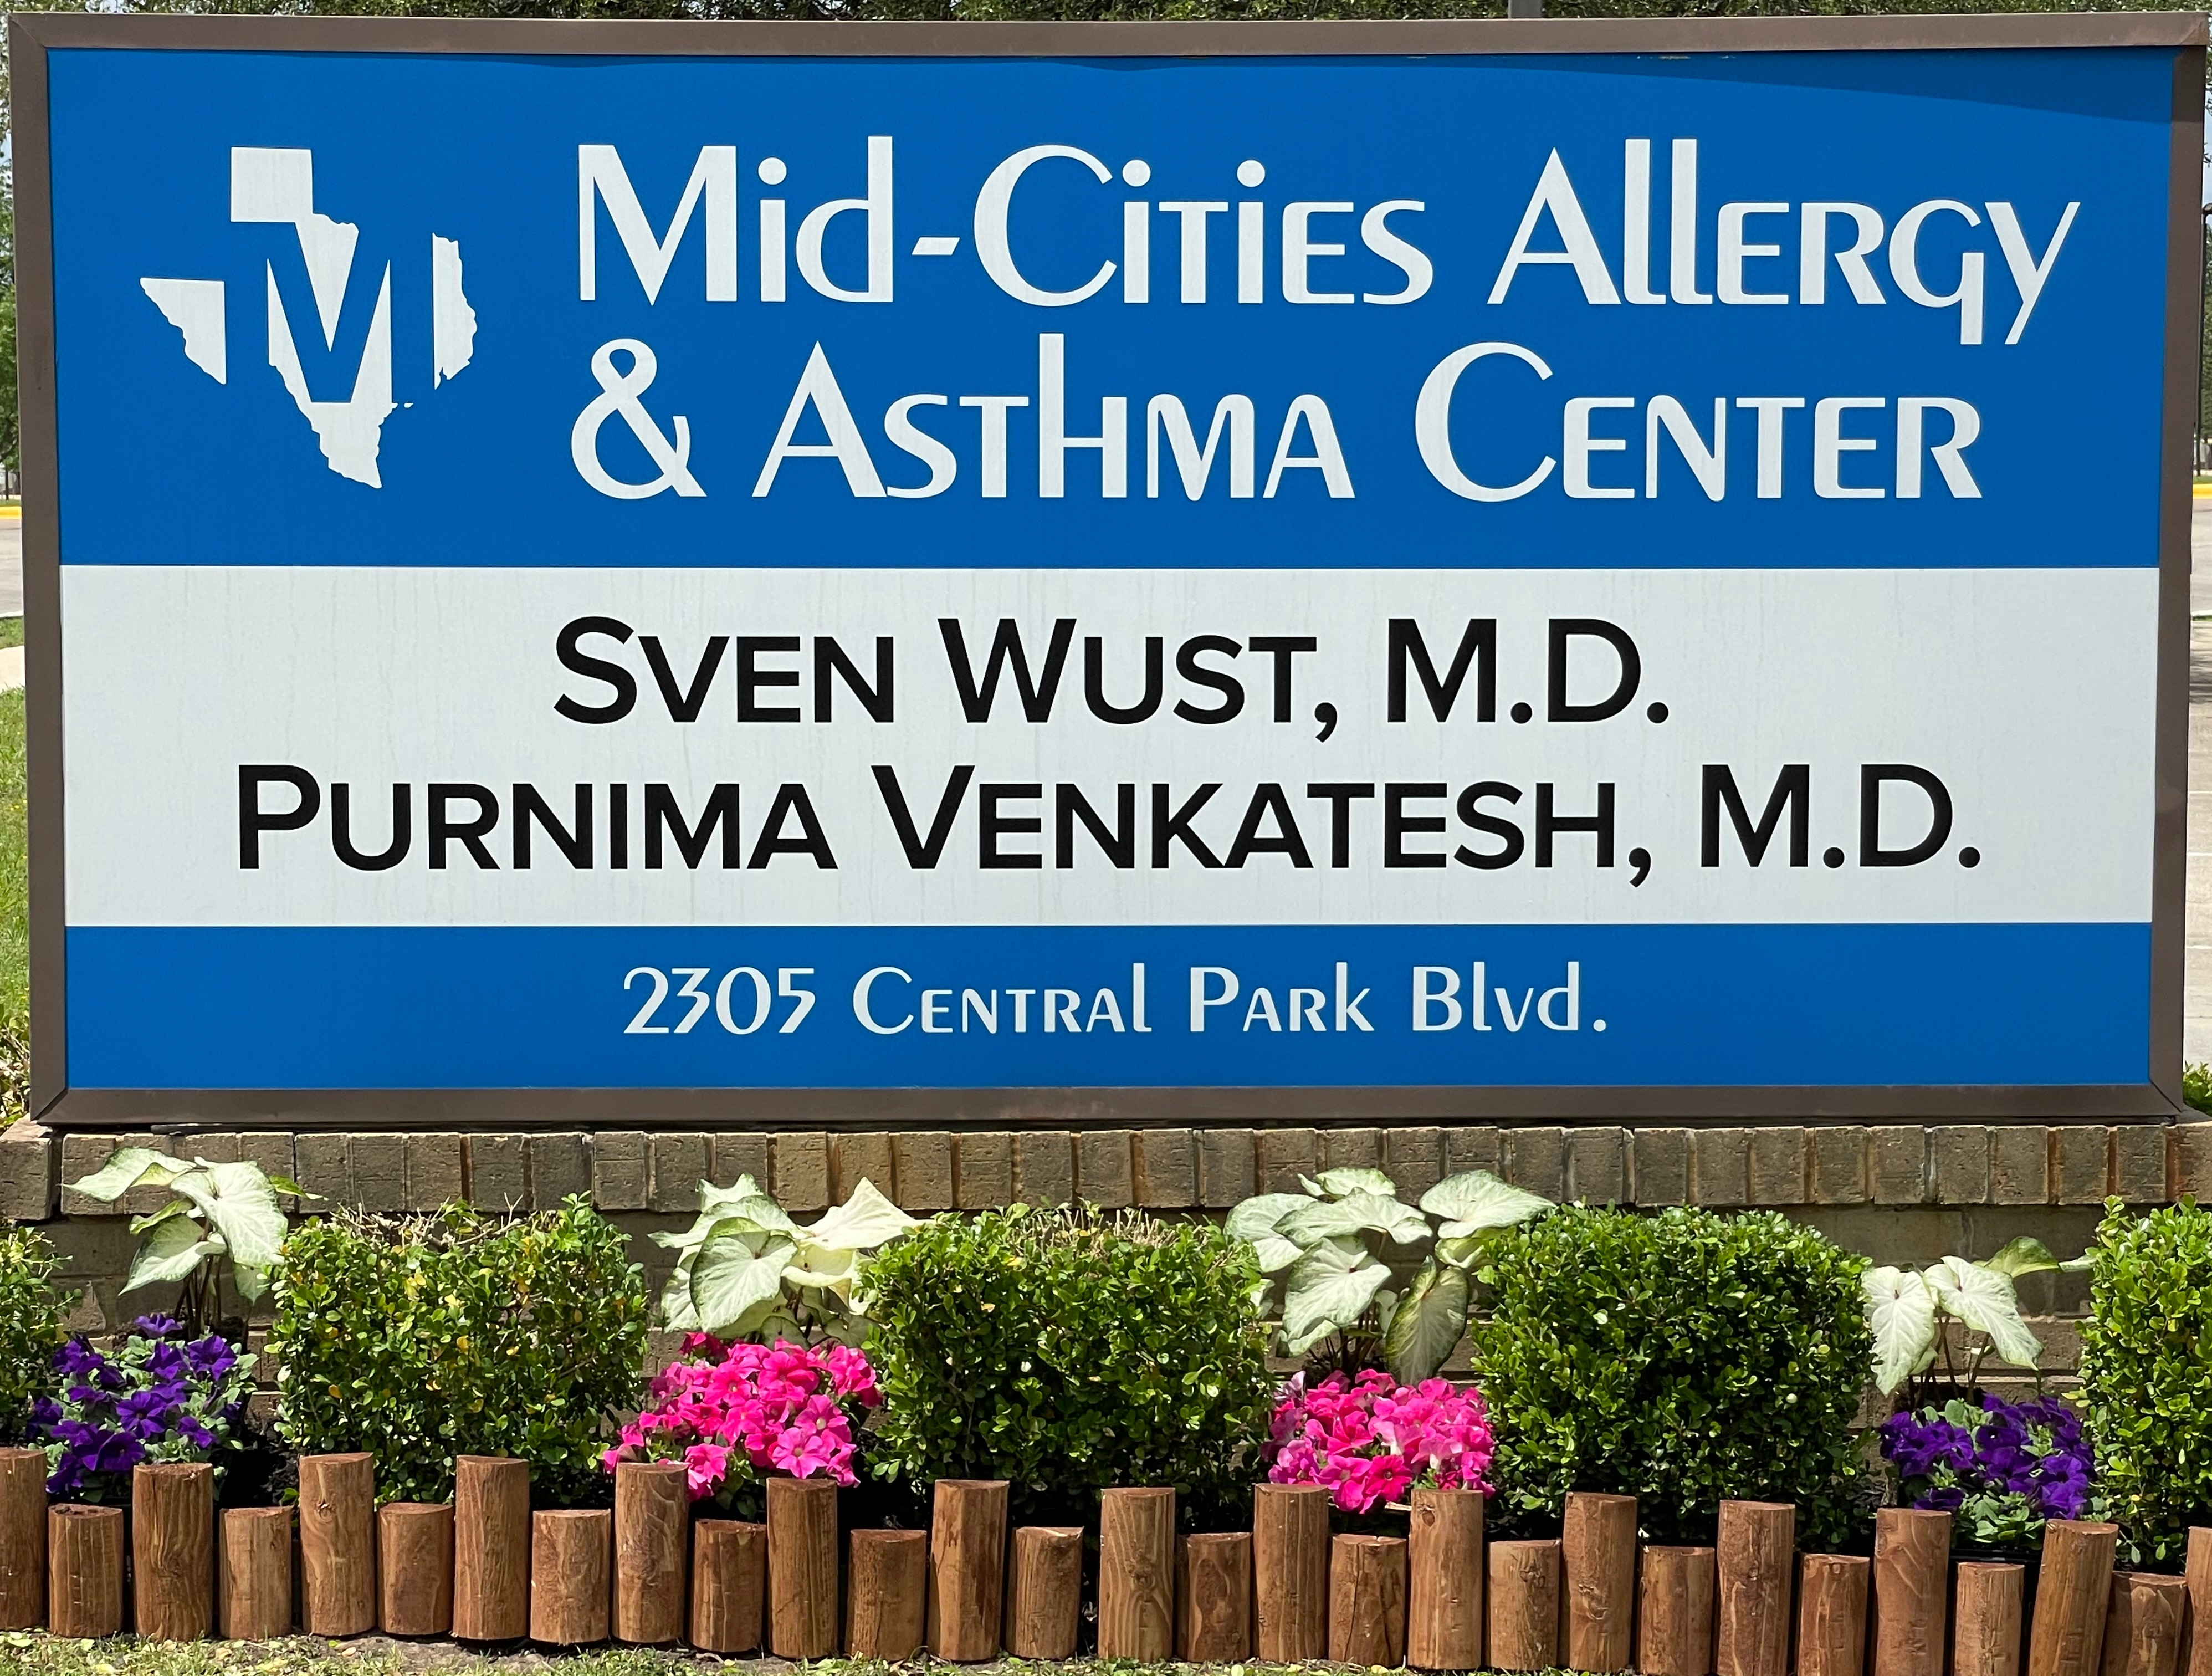 Mid-Cities Allergy & Asthma Center Company Signage